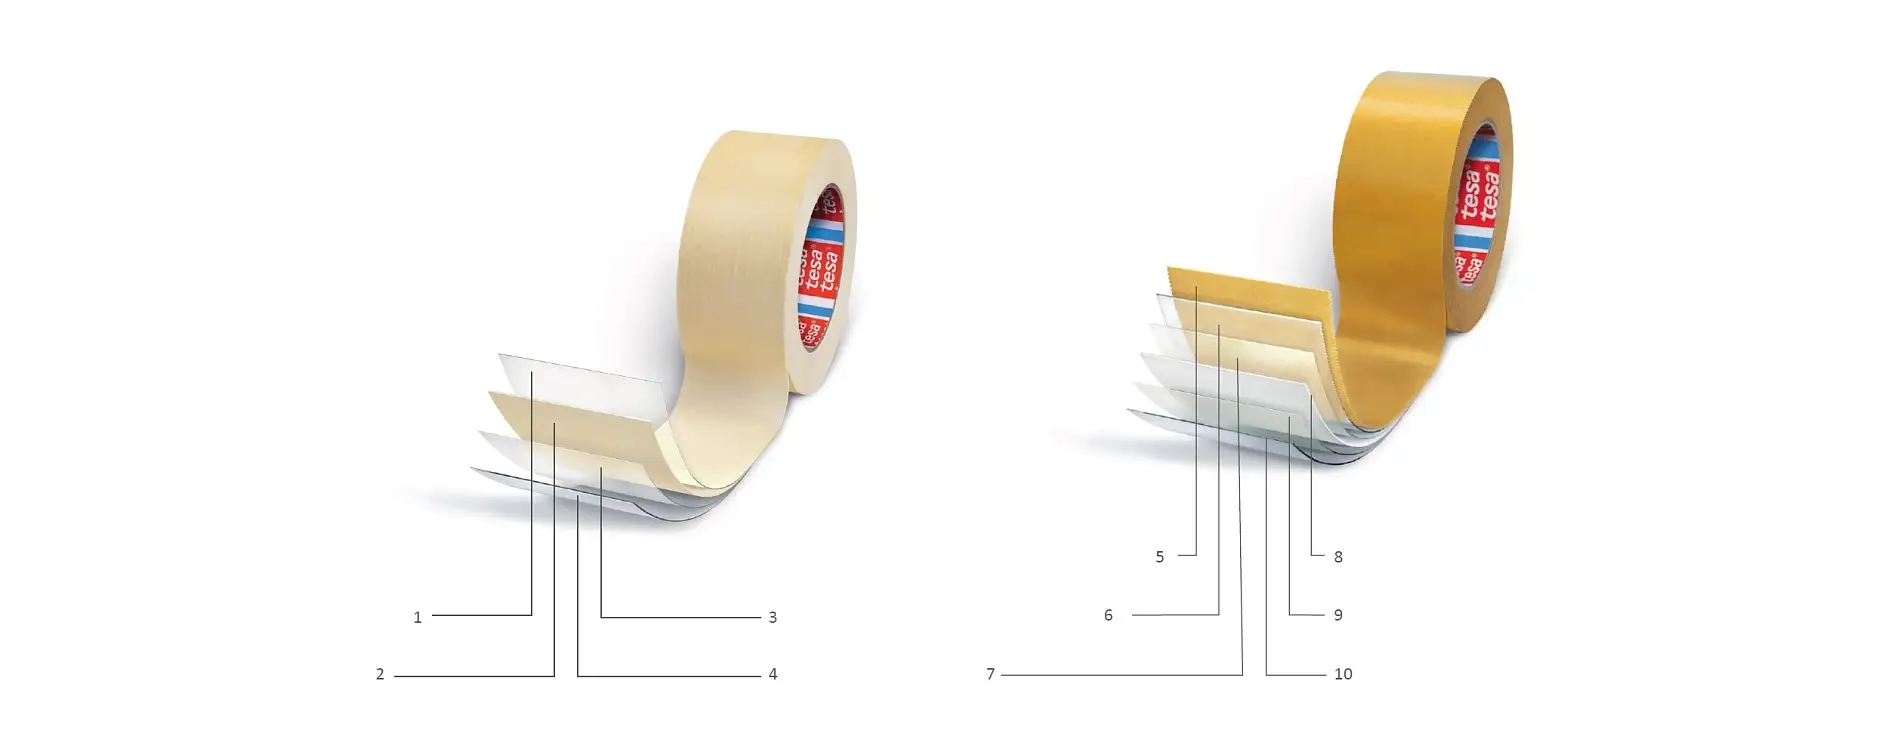 Structure of single-sided (left) and double-sided (right) adhesive tape: 1) Release coat, 2) Backing, 3) Primer, 4) Adhesive, 5) Release liner (Silicon coated), 6) Adhesive (closed side), 7) Primer, 8) Backing, 9) Primer, 10) Adhesive (open side)